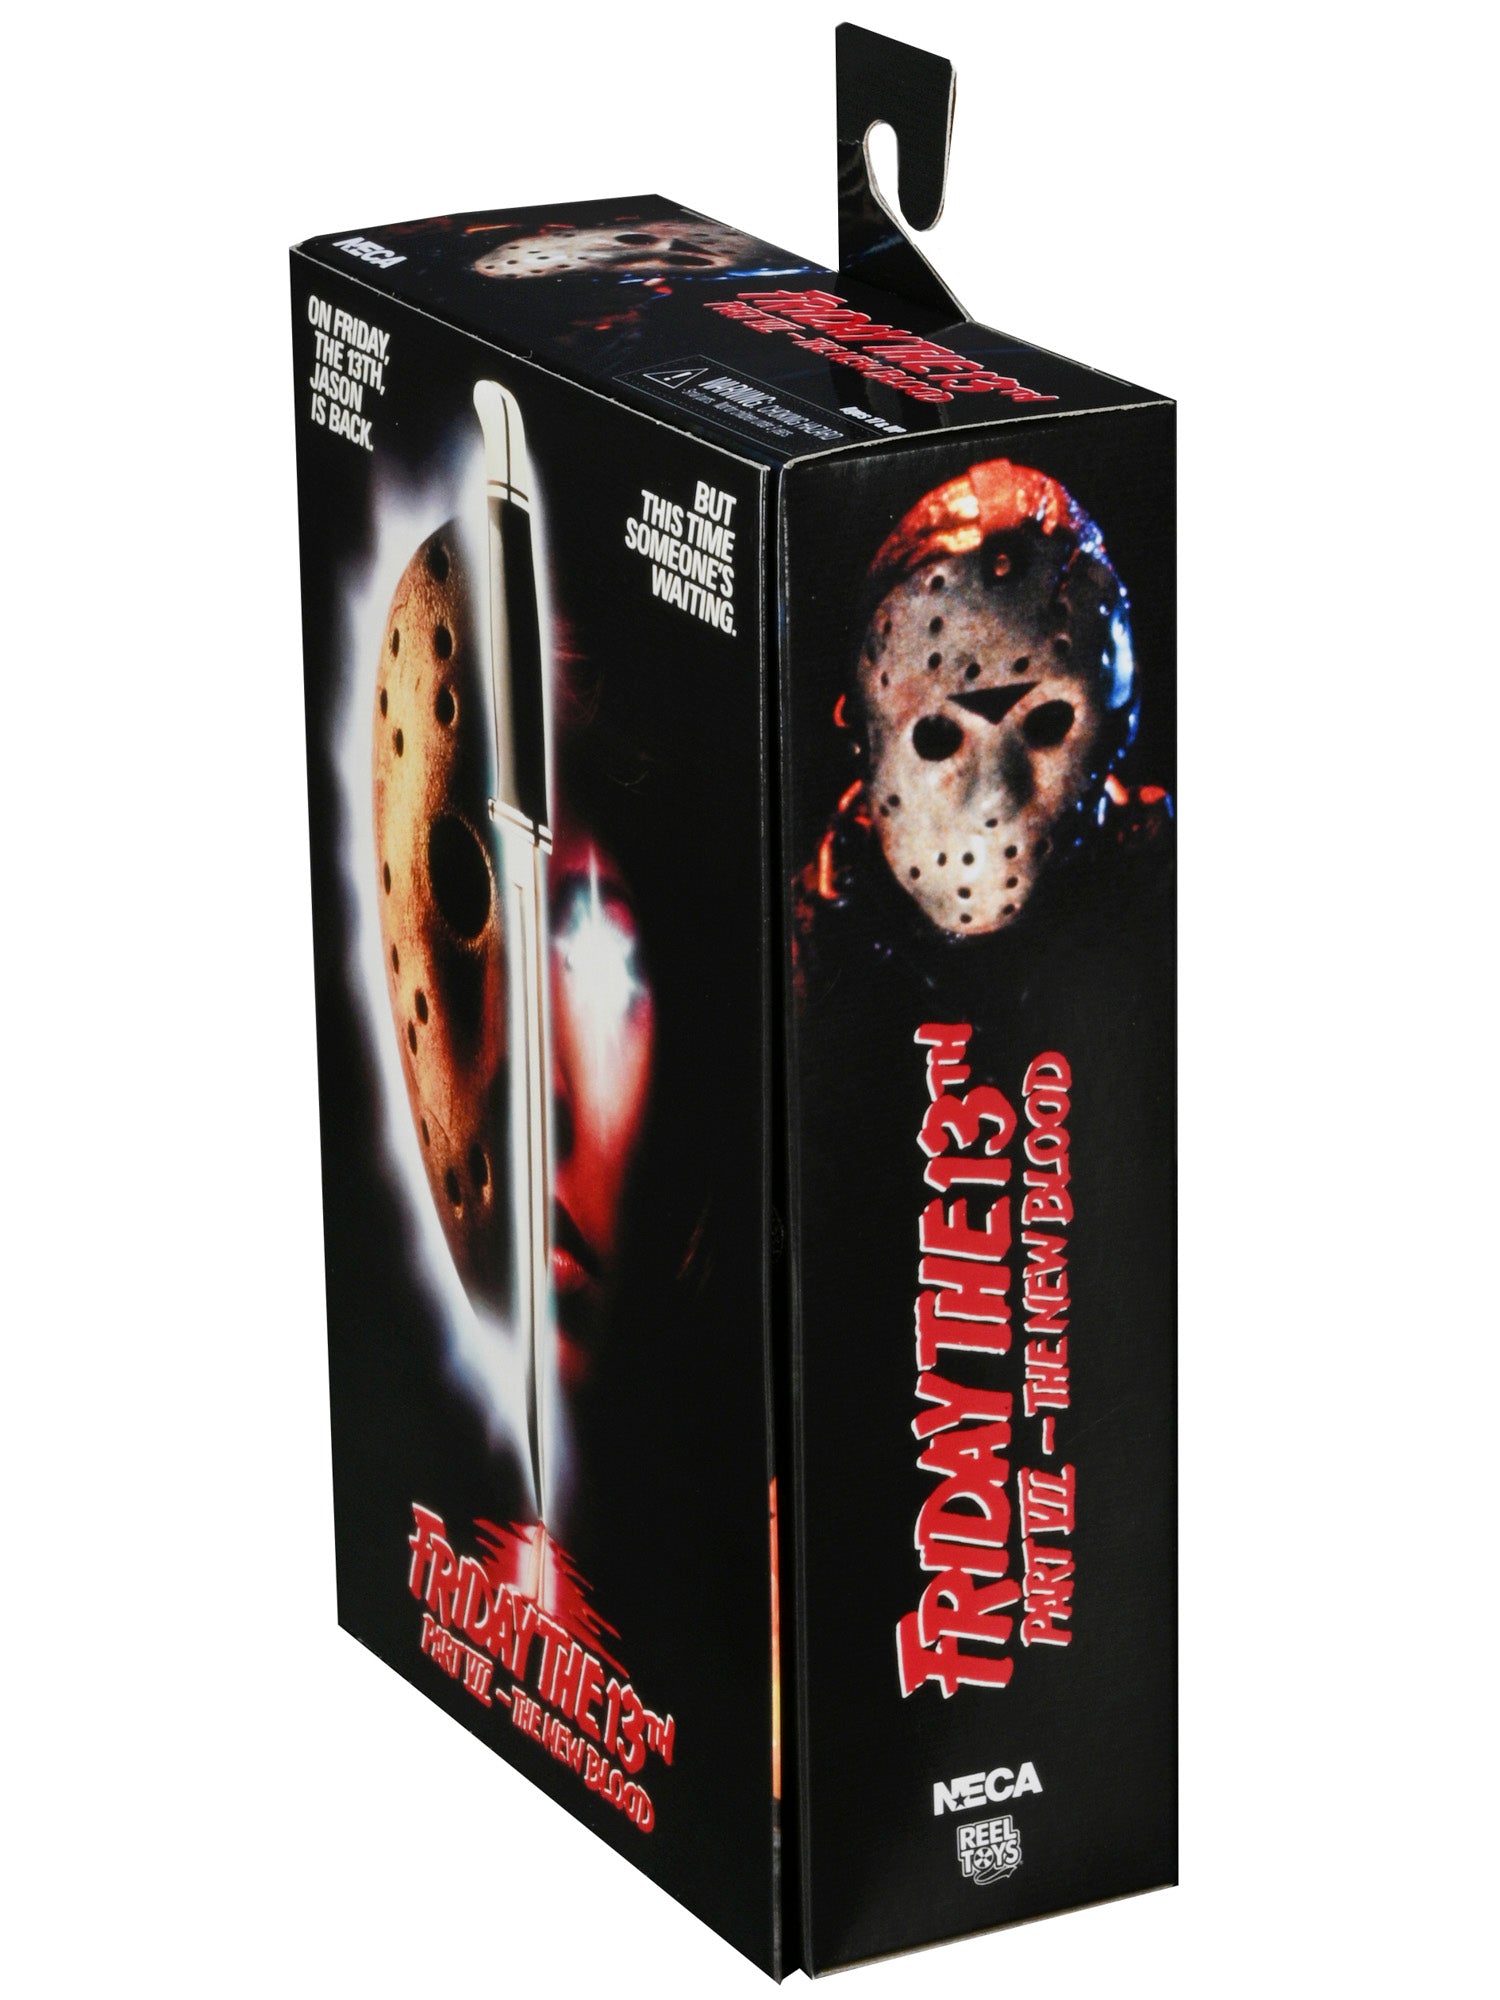 NECA - Friday the 13th - 7" Scale Action Figure - Ultimate Part 7 (New Blood) Jason - costumes.com